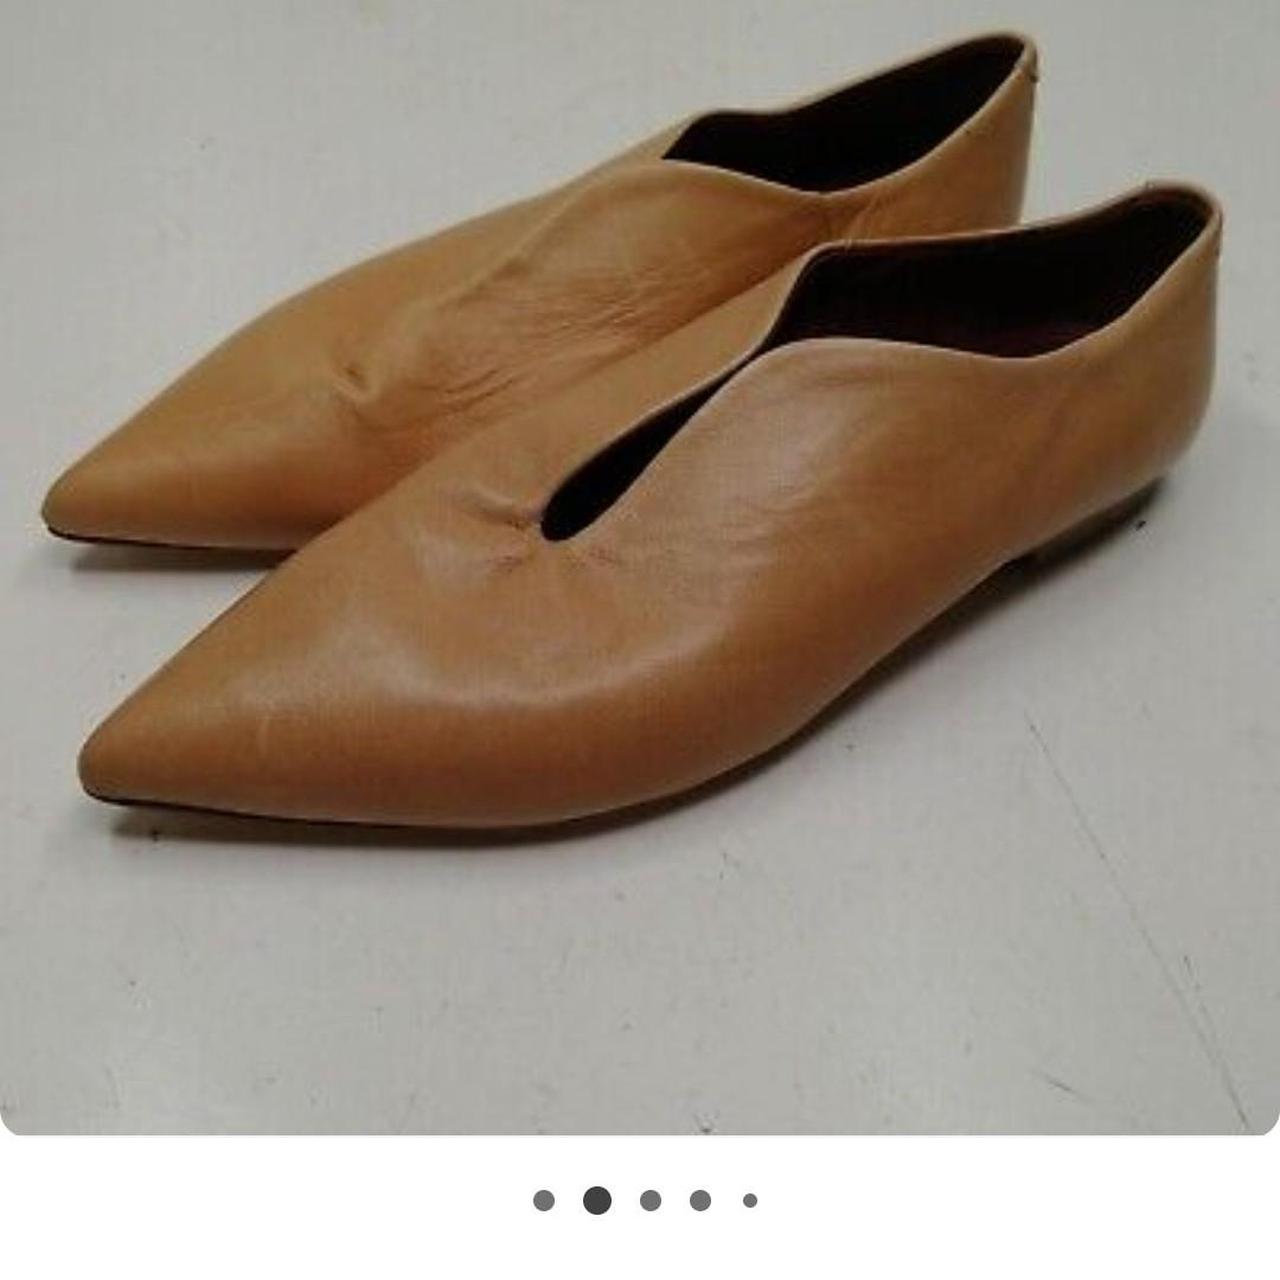 Tan Zara leather flats. Great condition. Says size 3... - Depop